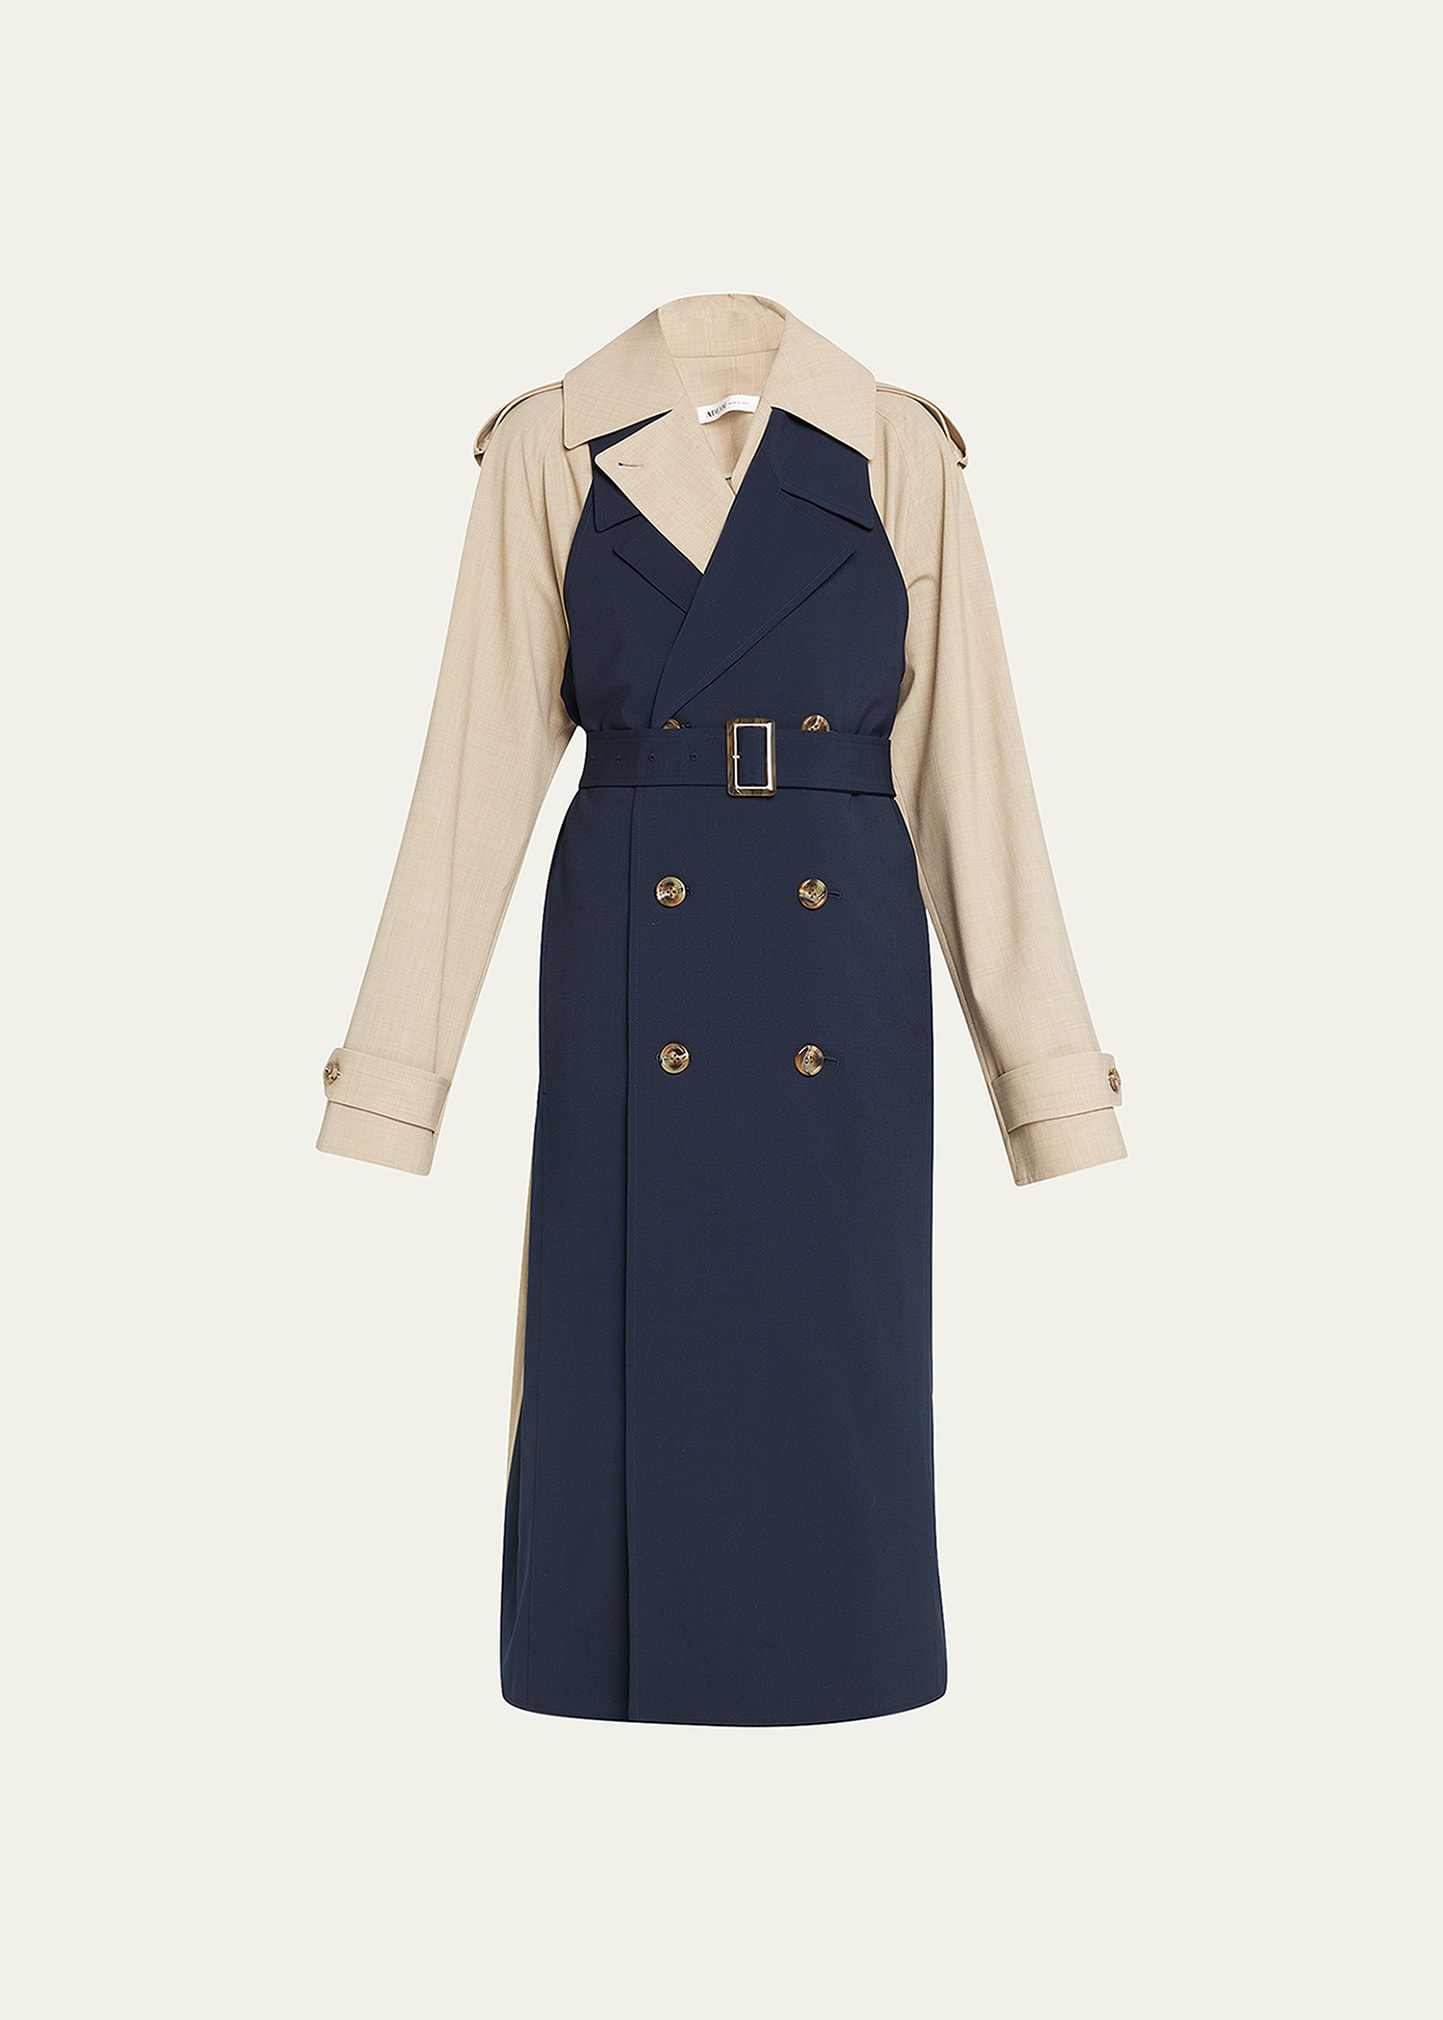 Bricolage Double-Breasted Bicolor Belted Trench Coat